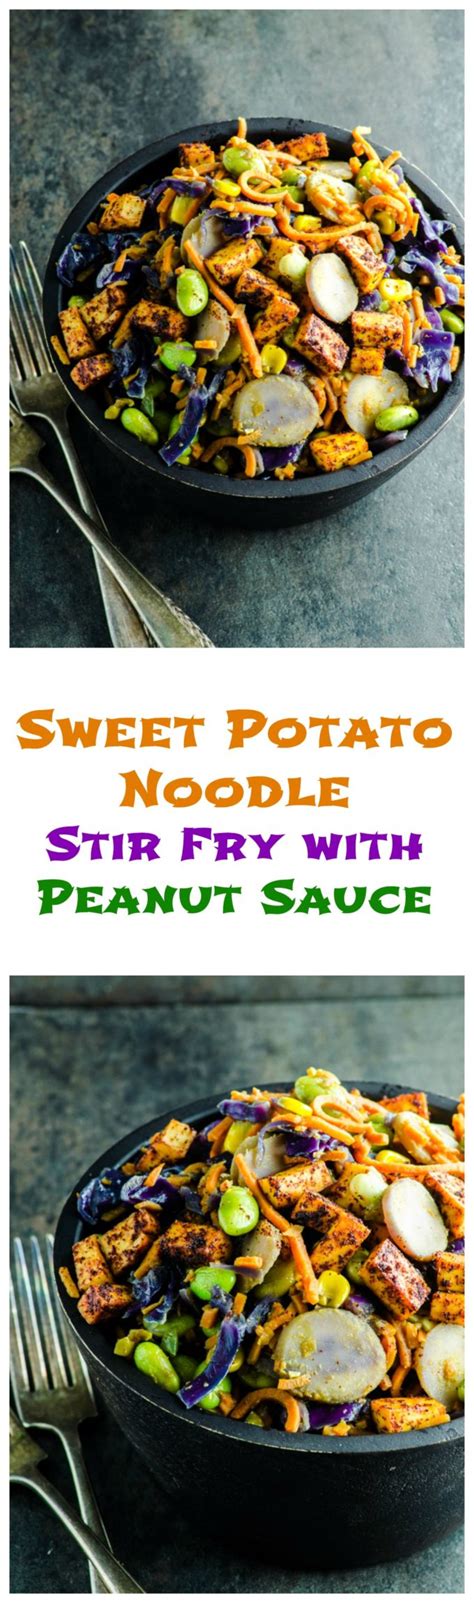 While they aren't necessarily super crispy (they're more like oven baked fries), they were gone within just a few minutes at my house. Sweet Potato Noodles Stir Fry with Peanut Sauce - May I ...